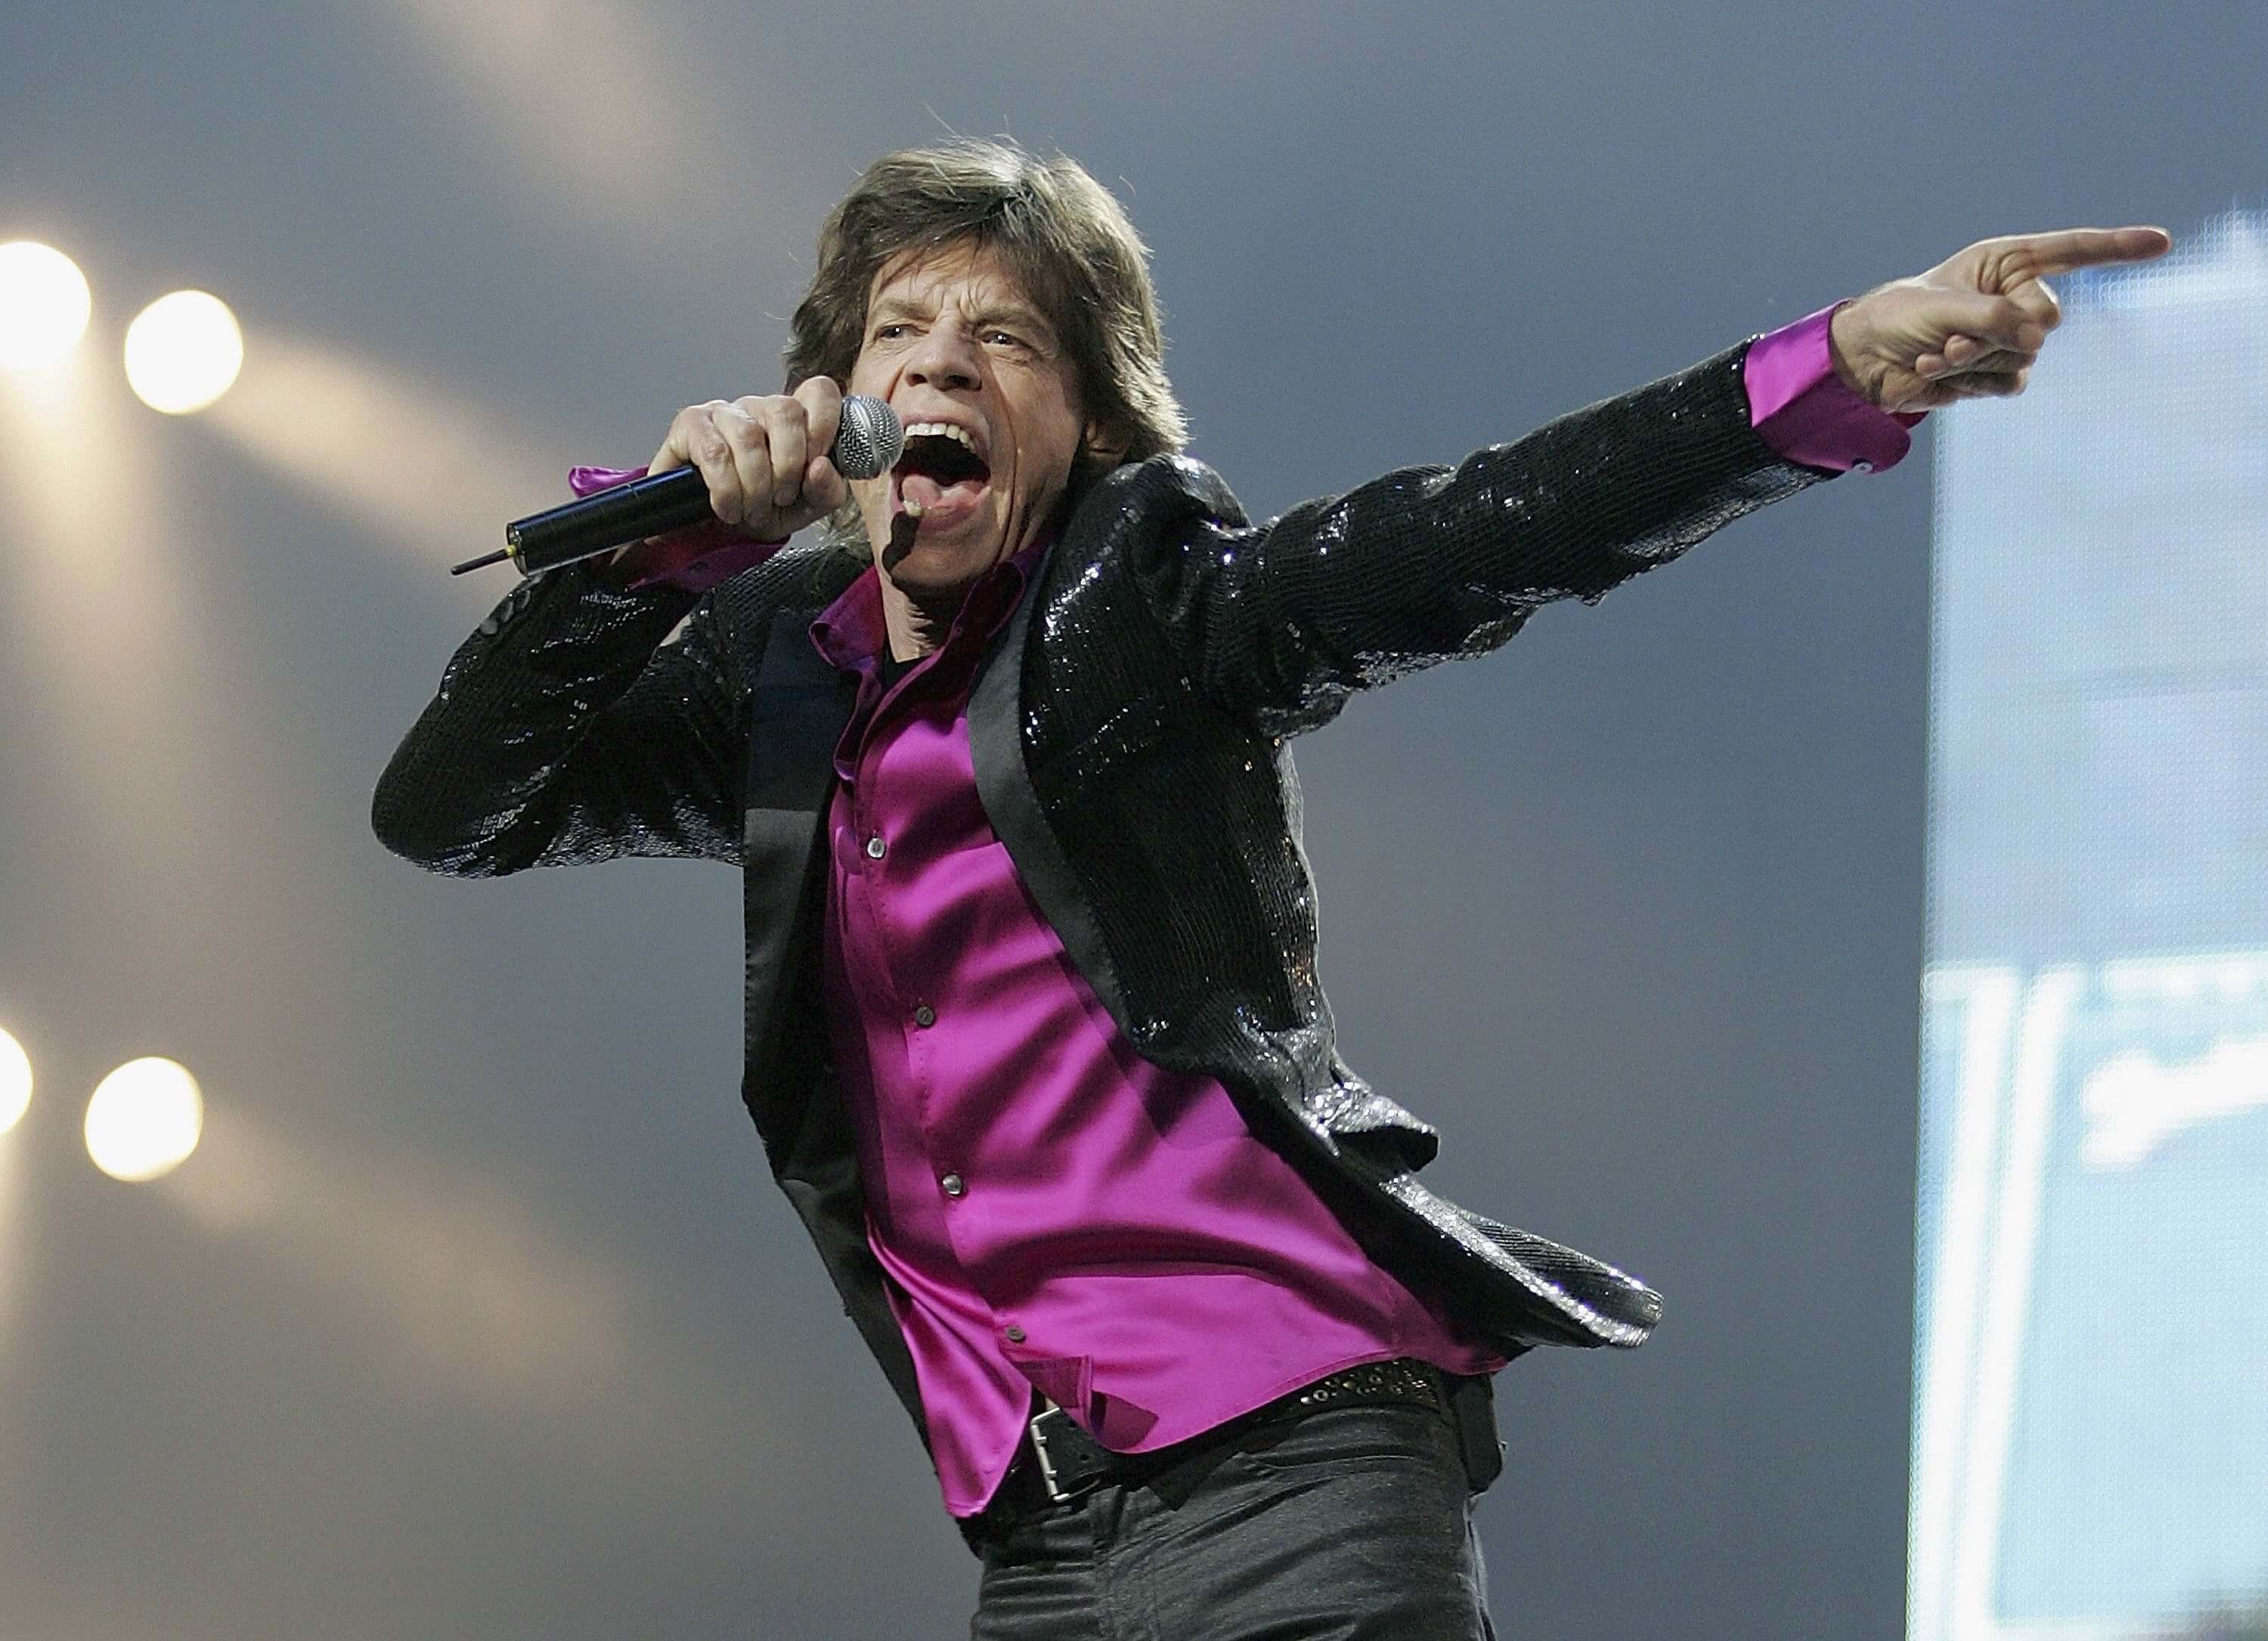 The Rolling Stones' Mick Jagger wearing purple